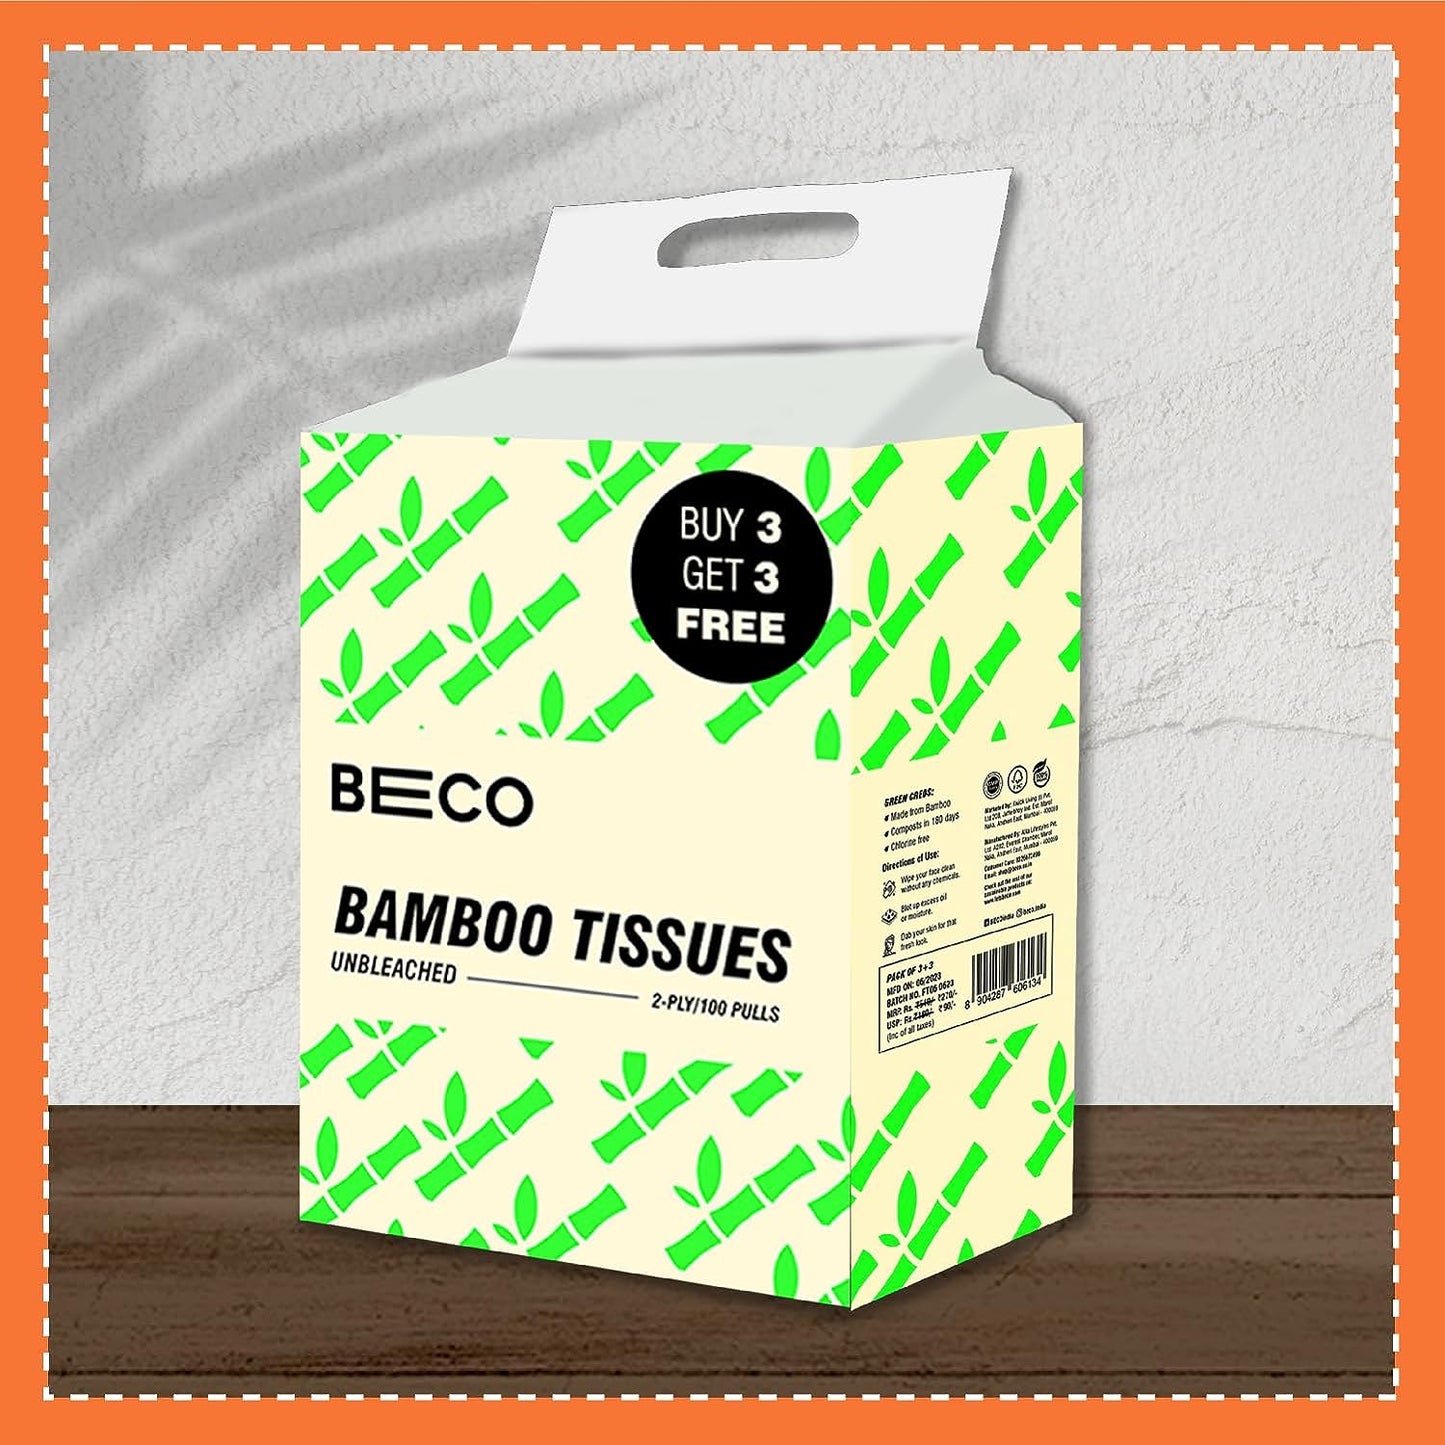 Beco Bamboo Super Soft Facial Tissue 100 Pulls (Pack of 6), 600 Pulls 2 ply 100% Natural and Ecofriendly